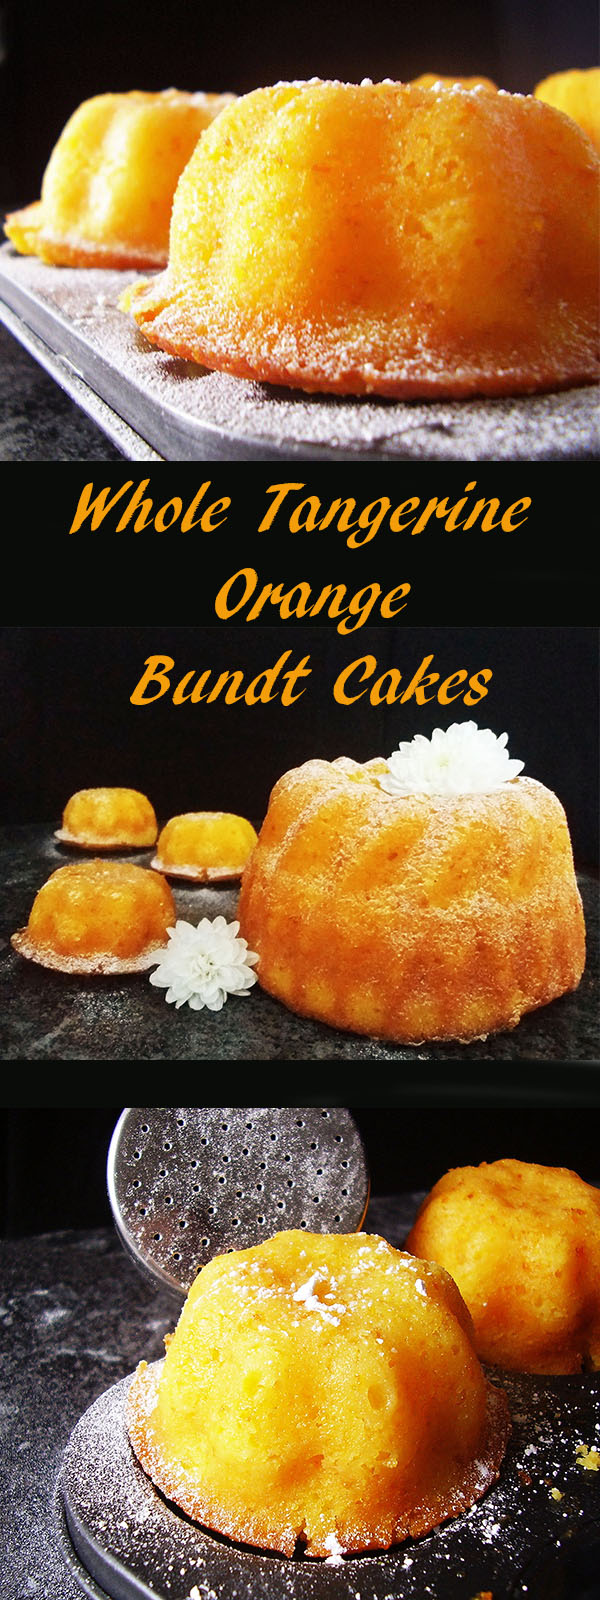 Whole Tangerine Cake Bundts are so moist, delicate, refreshing, and soft. Whole oranges are boiled before putting all the ingredients together and it makes it so  very special and tasty dessert recipe!